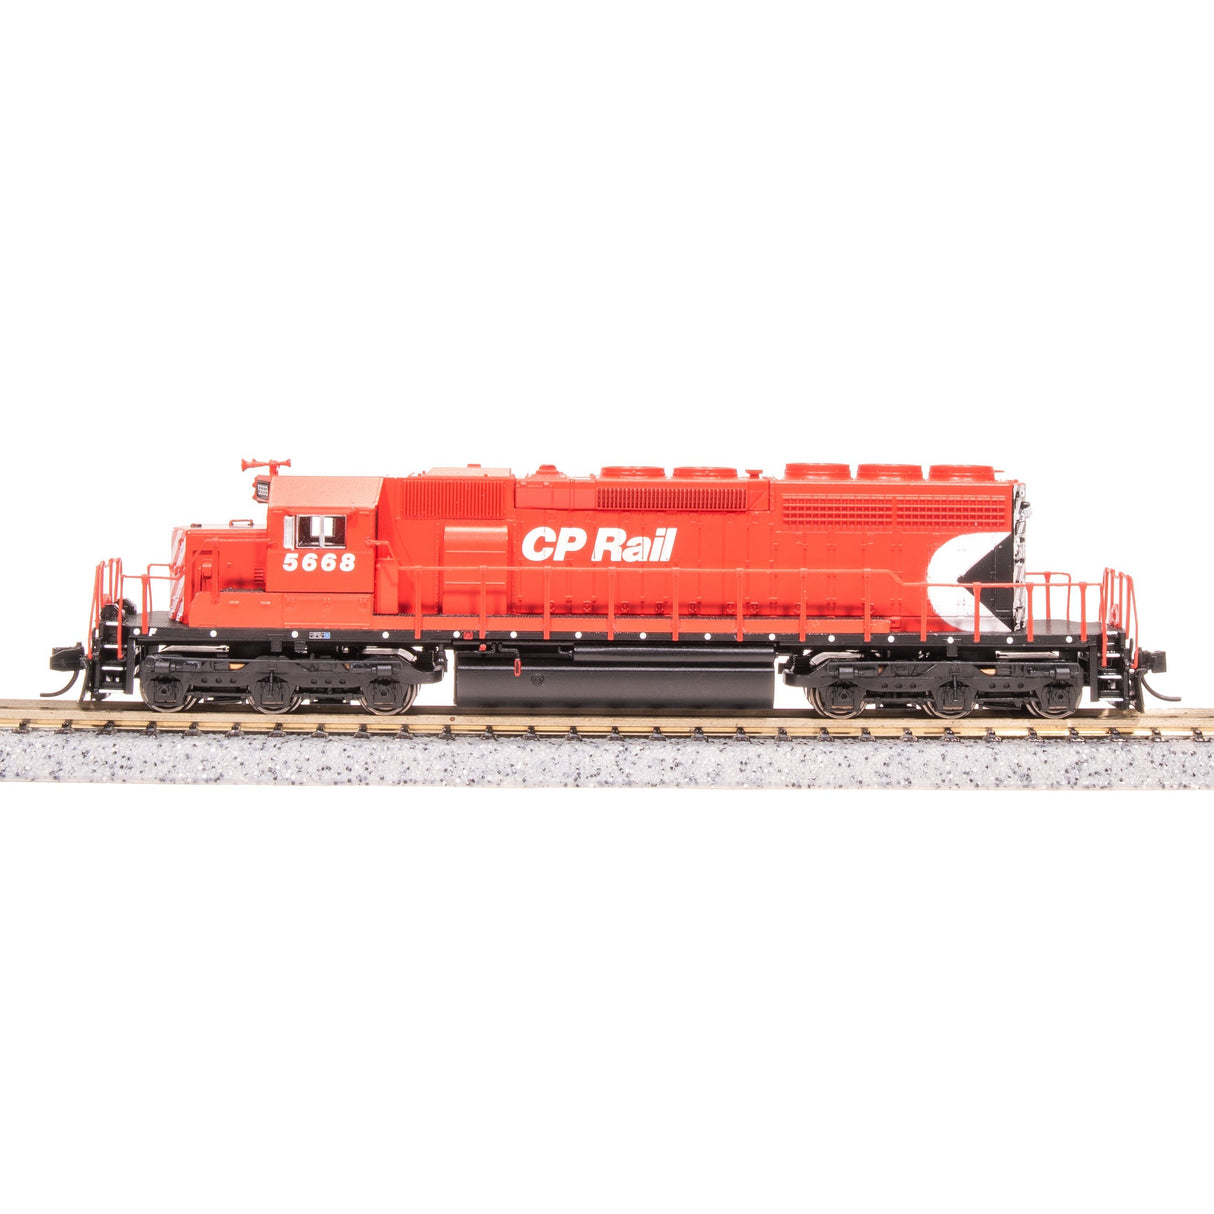 Broadway Limited N Scale SD40-2 Diesel CP Rail #5692/Multimark DC/DCC Sound